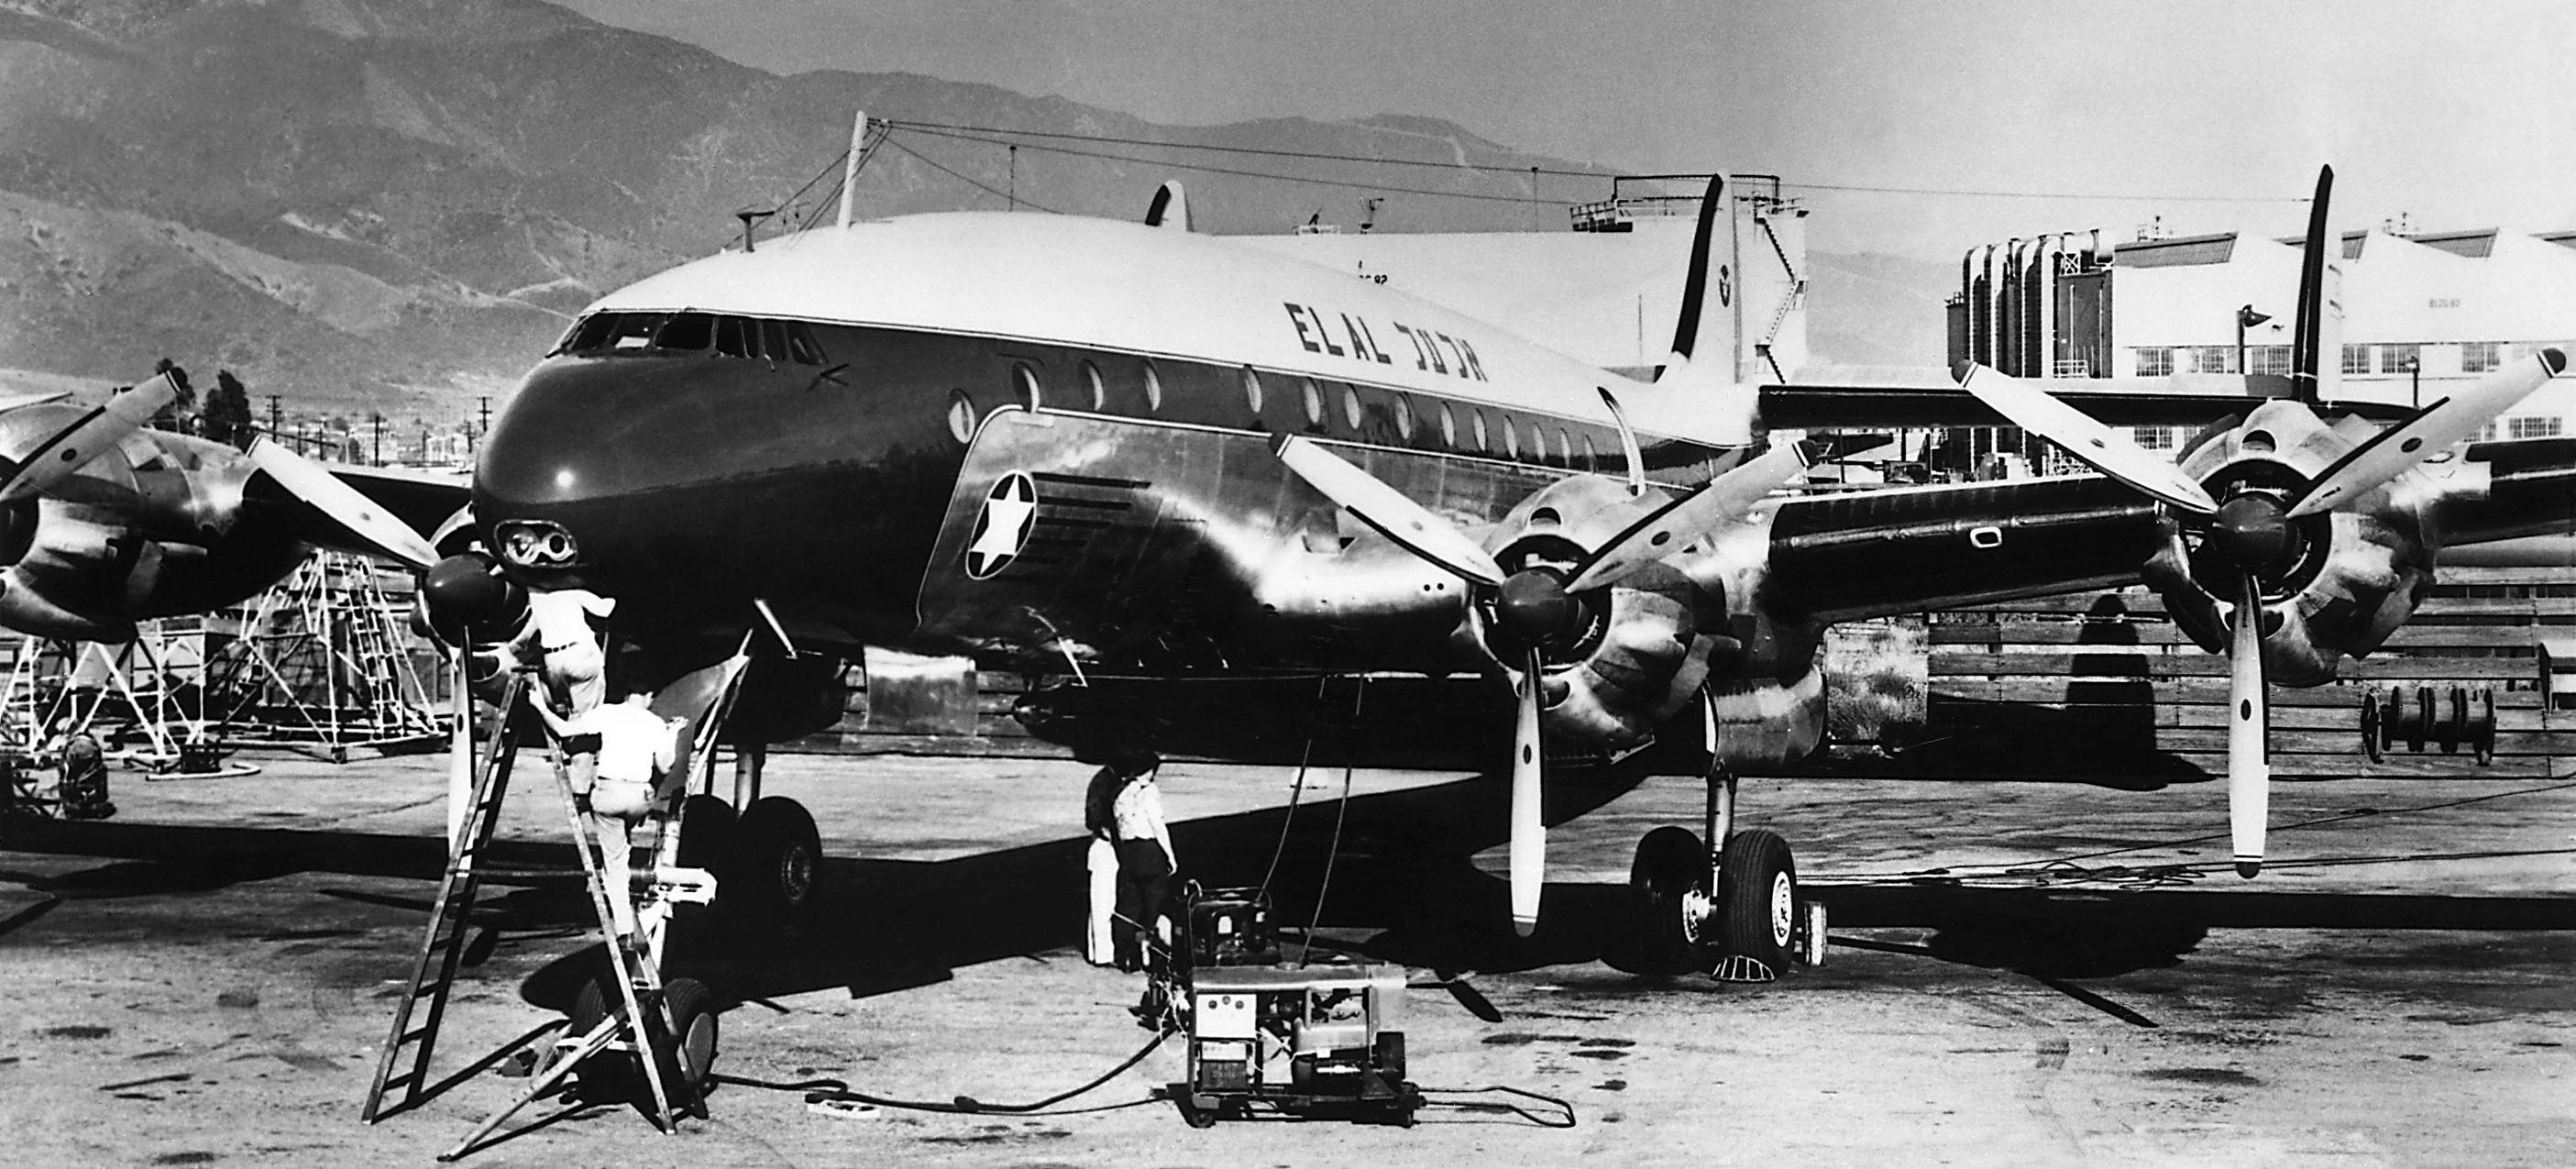 One of EL AL's first Lockheed 049 Constellations being refurbished for passenger service by Schwimmer Aviation at Burbank, California, 1950. (BIAF—Israel Aviation & Space Magazine) 